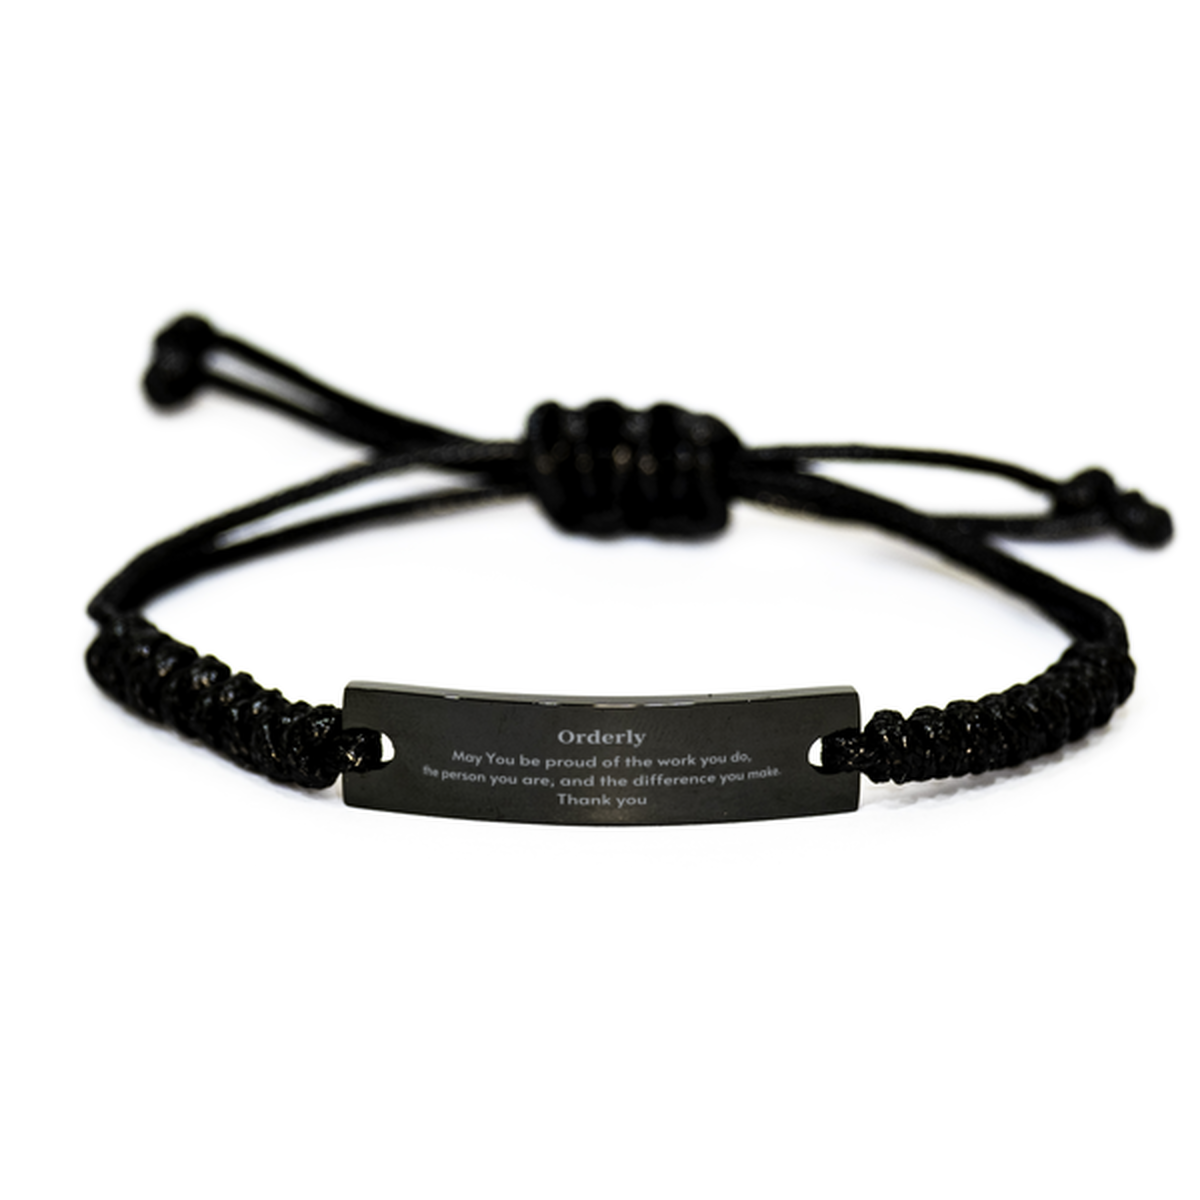 Heartwarming Black Rope Bracelet Retirement Coworkers Gifts for Orderly, Orderly May You be proud of the work you do, the person you are Gifts for Boss Men Women Friends